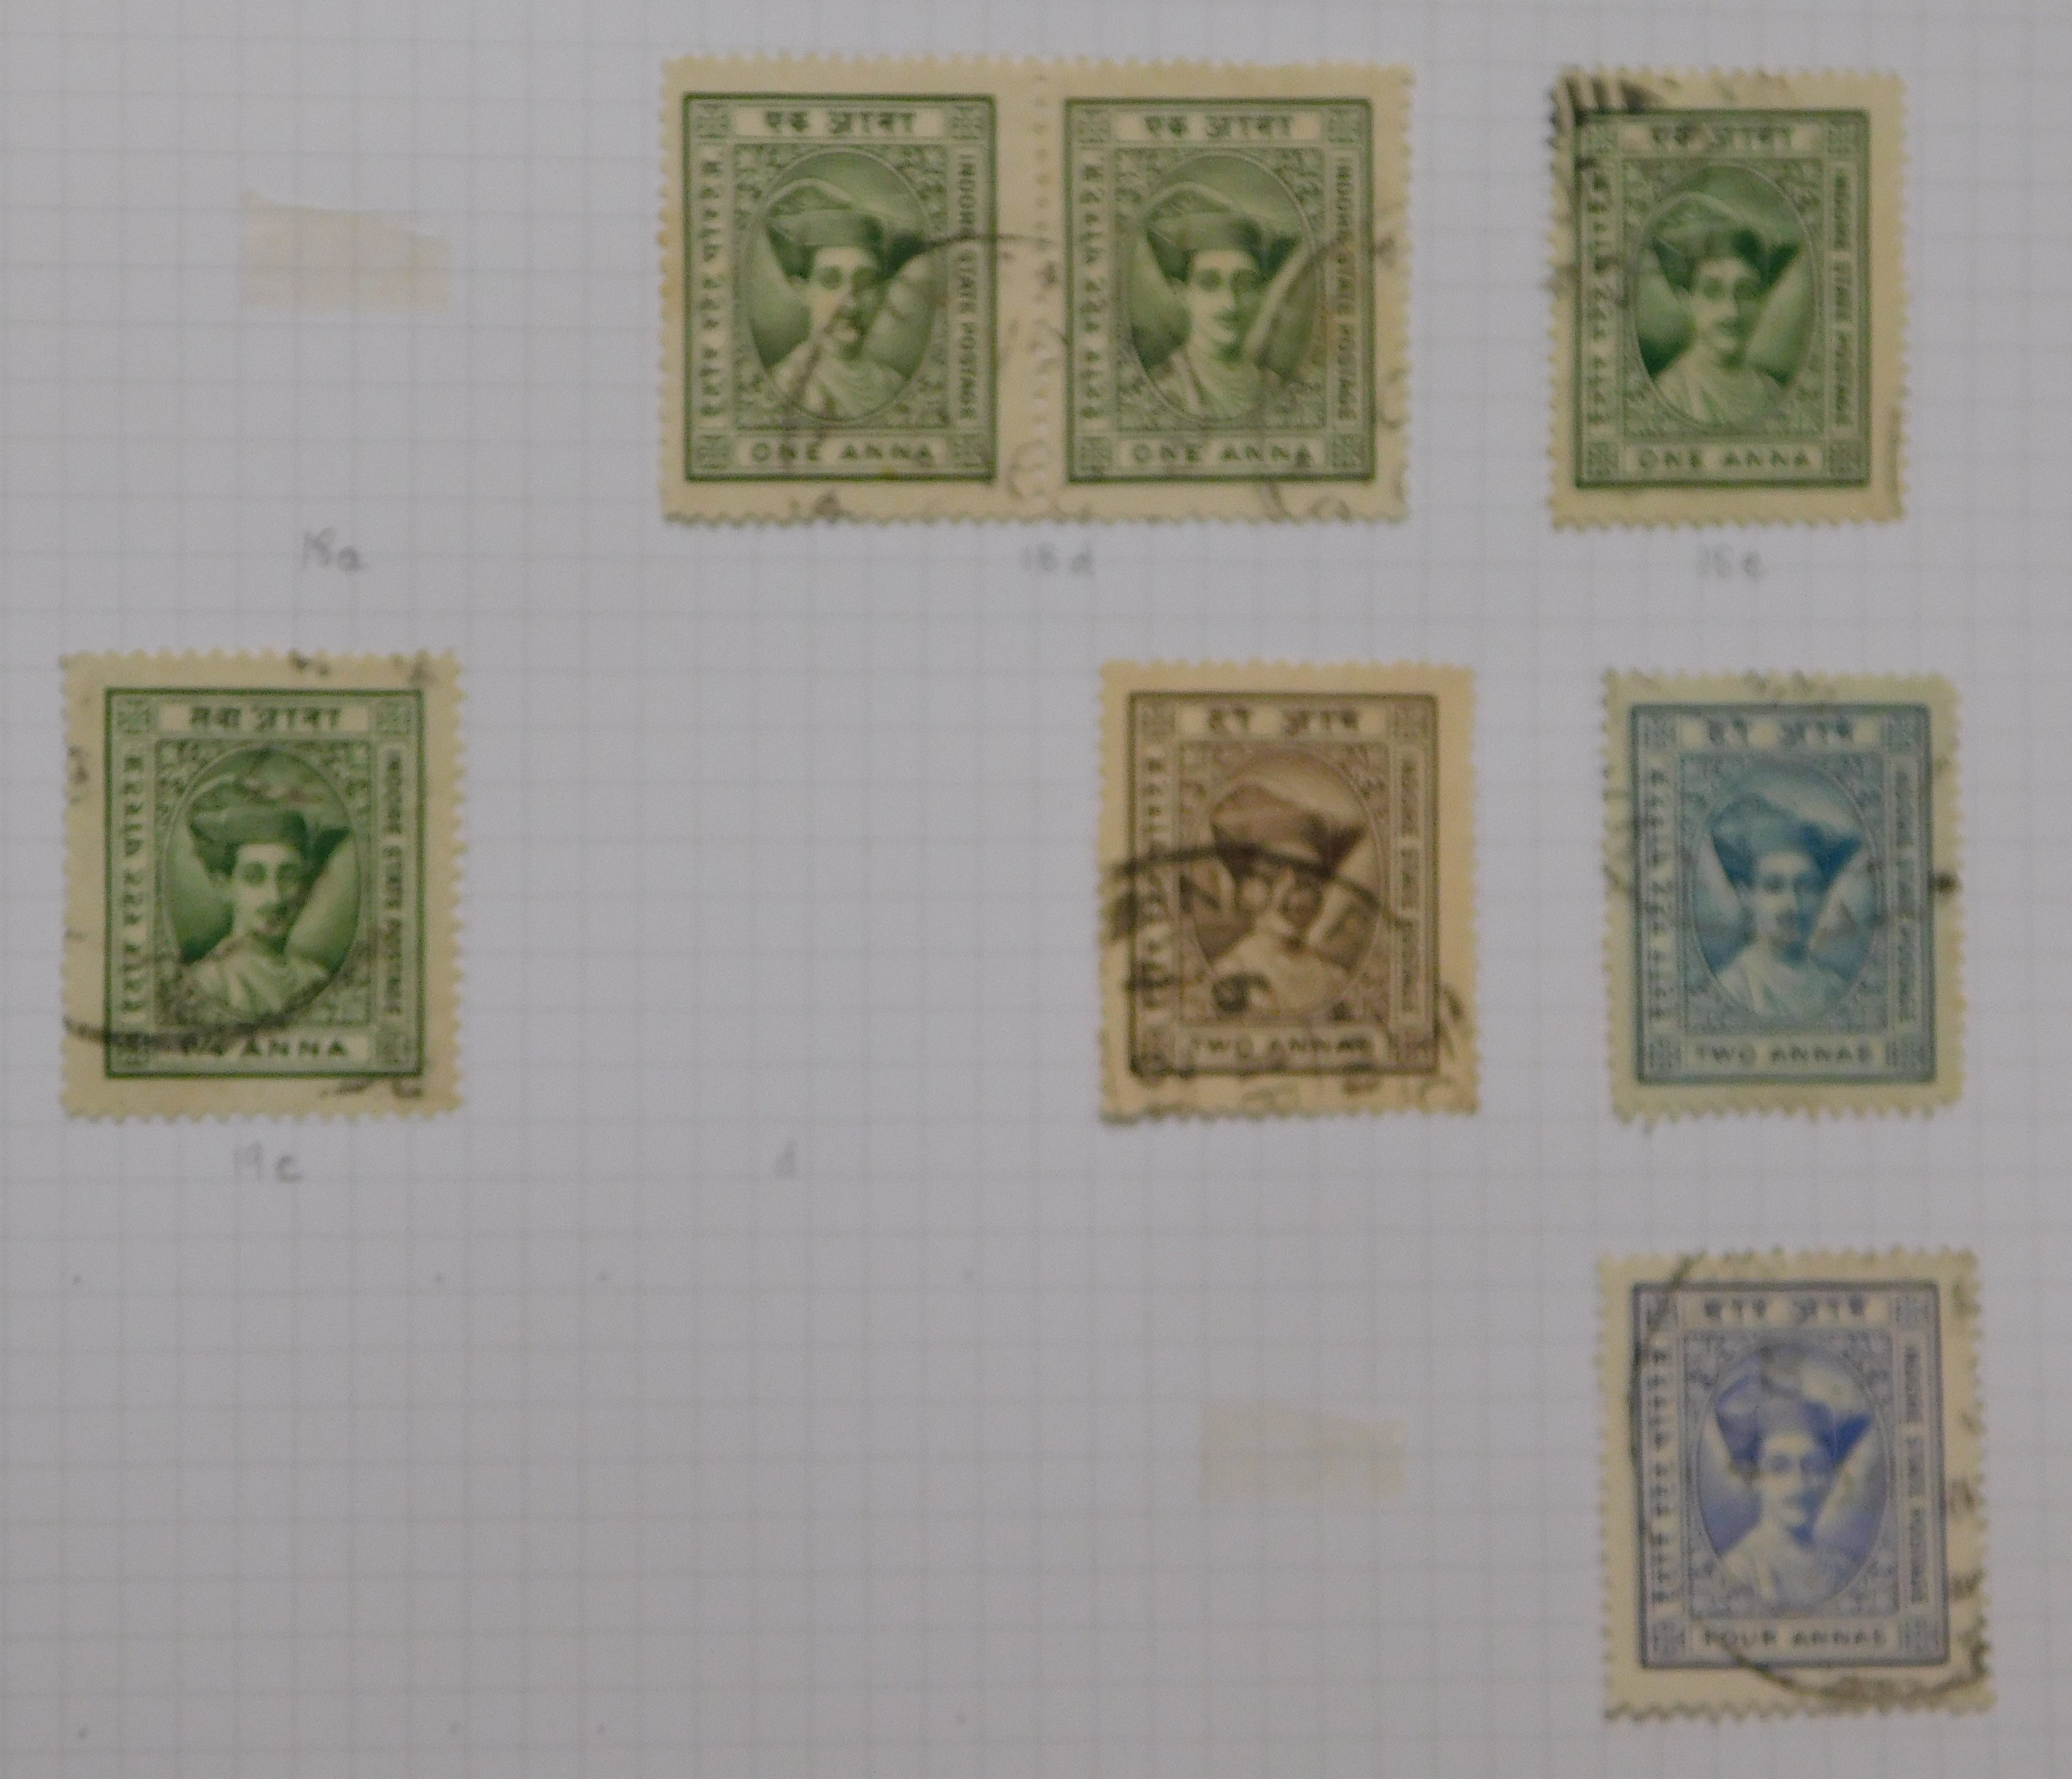 India (Indore) 1904-20 fine used, Incl SG 11b (Cat £225) and 1927 to 4 Anna (23) - Image 3 of 5